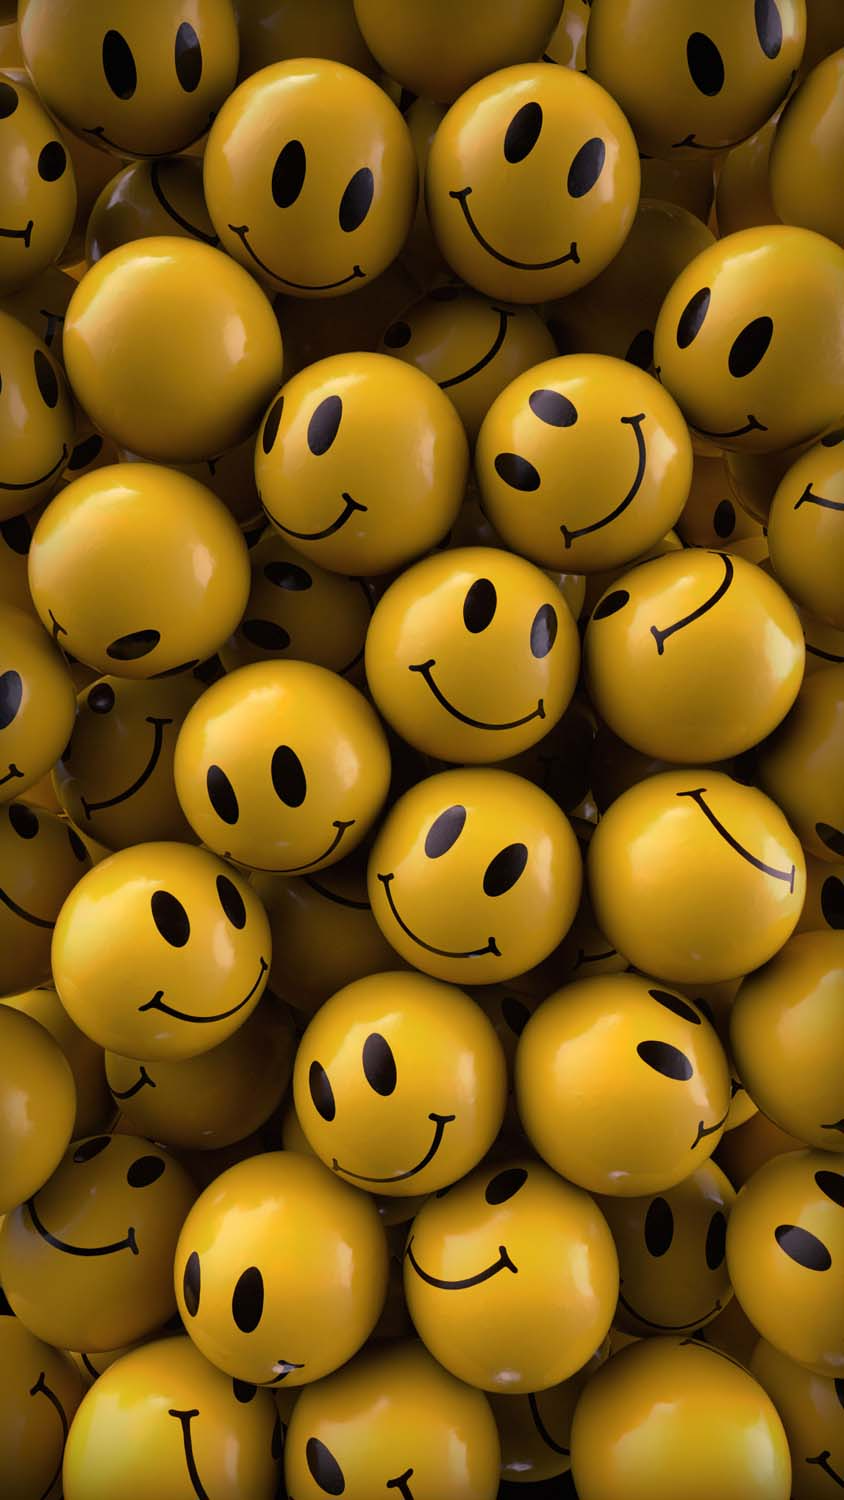 Smile emoji wallpaper by GirlBad38  Download on ZEDGE  f17f